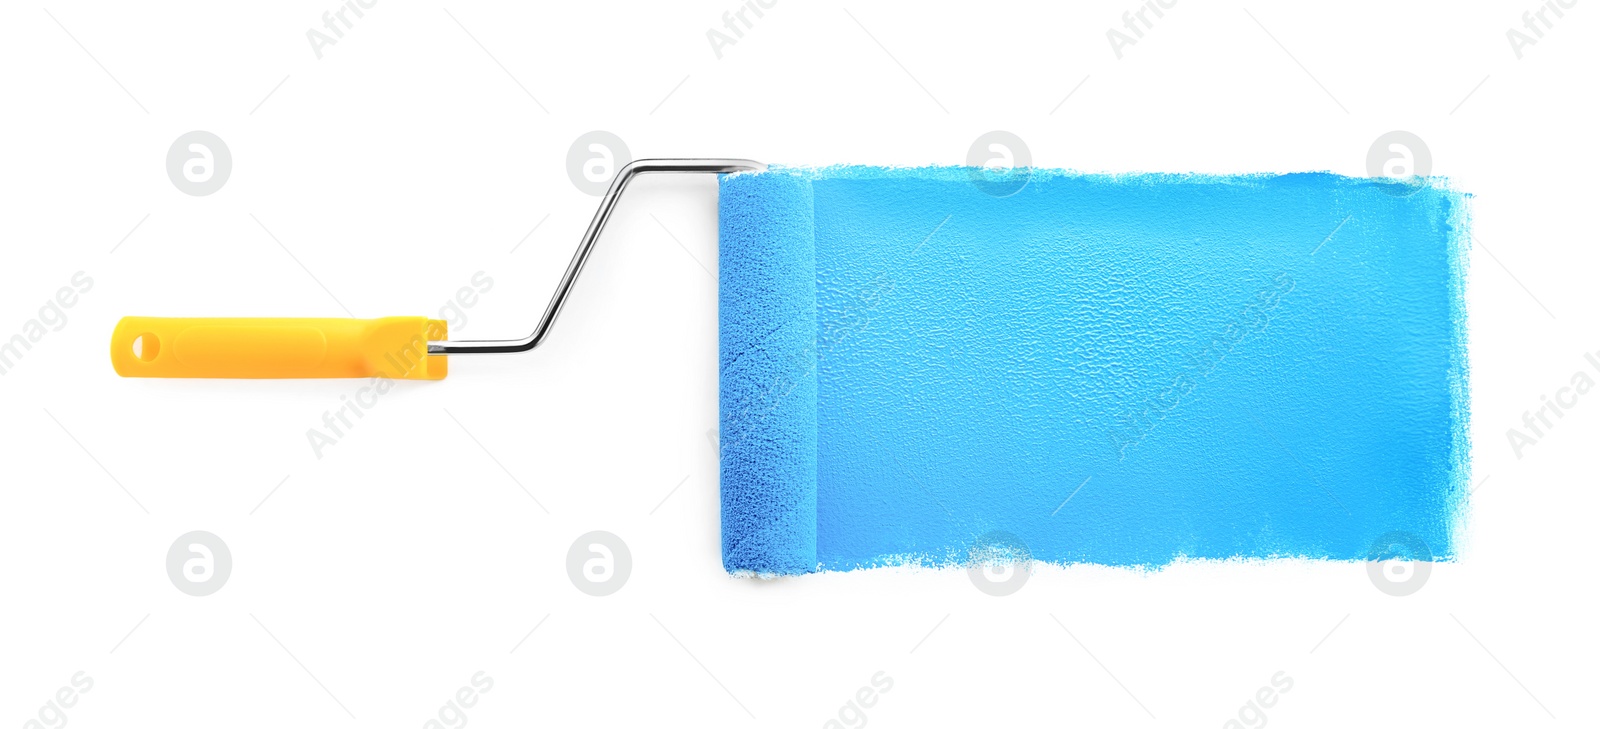 Photo of Roller brush with light blue paint on white background